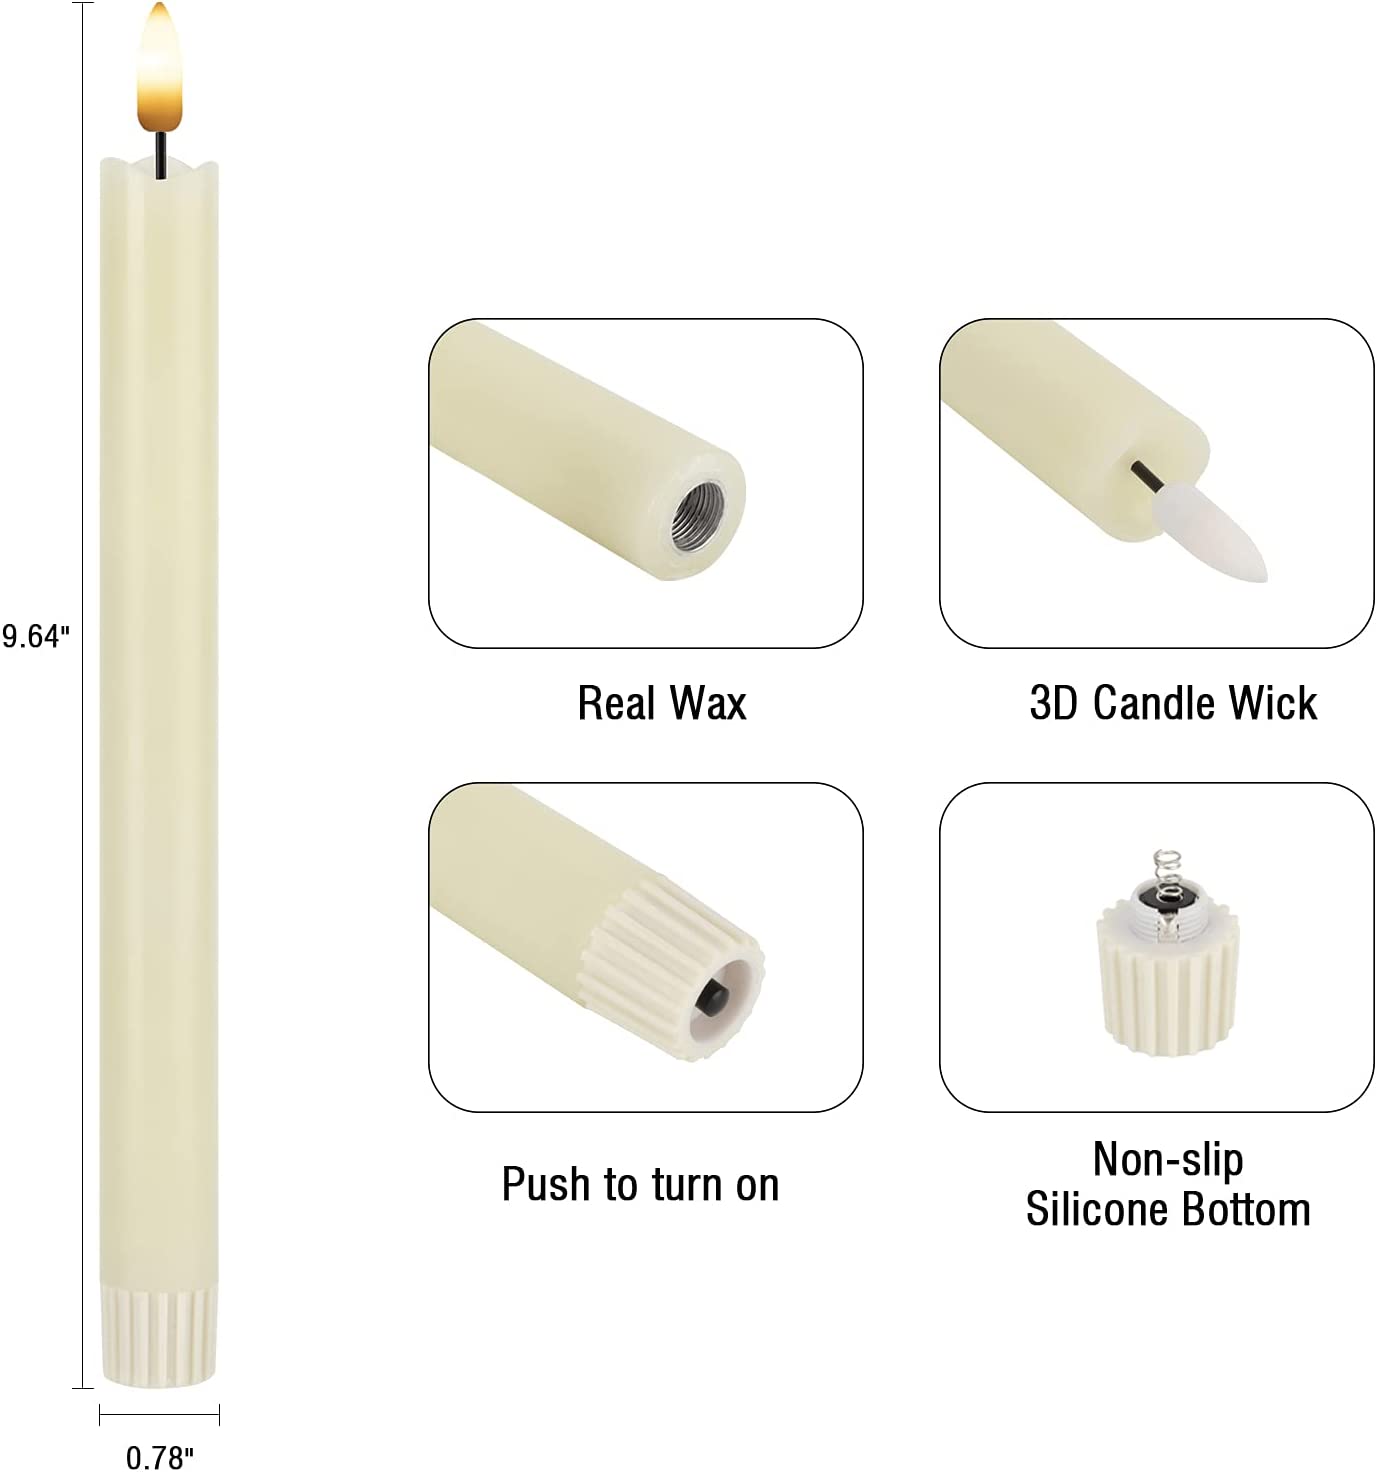 Flameless Taper Candles Flickering Battery Operated, 3D Wick Warm Light Electric Candles with 10-Key Remote, LED Window Candles Real Wax Pack of 6 for Christmas Home Party Wedding Decor (White Ivory)